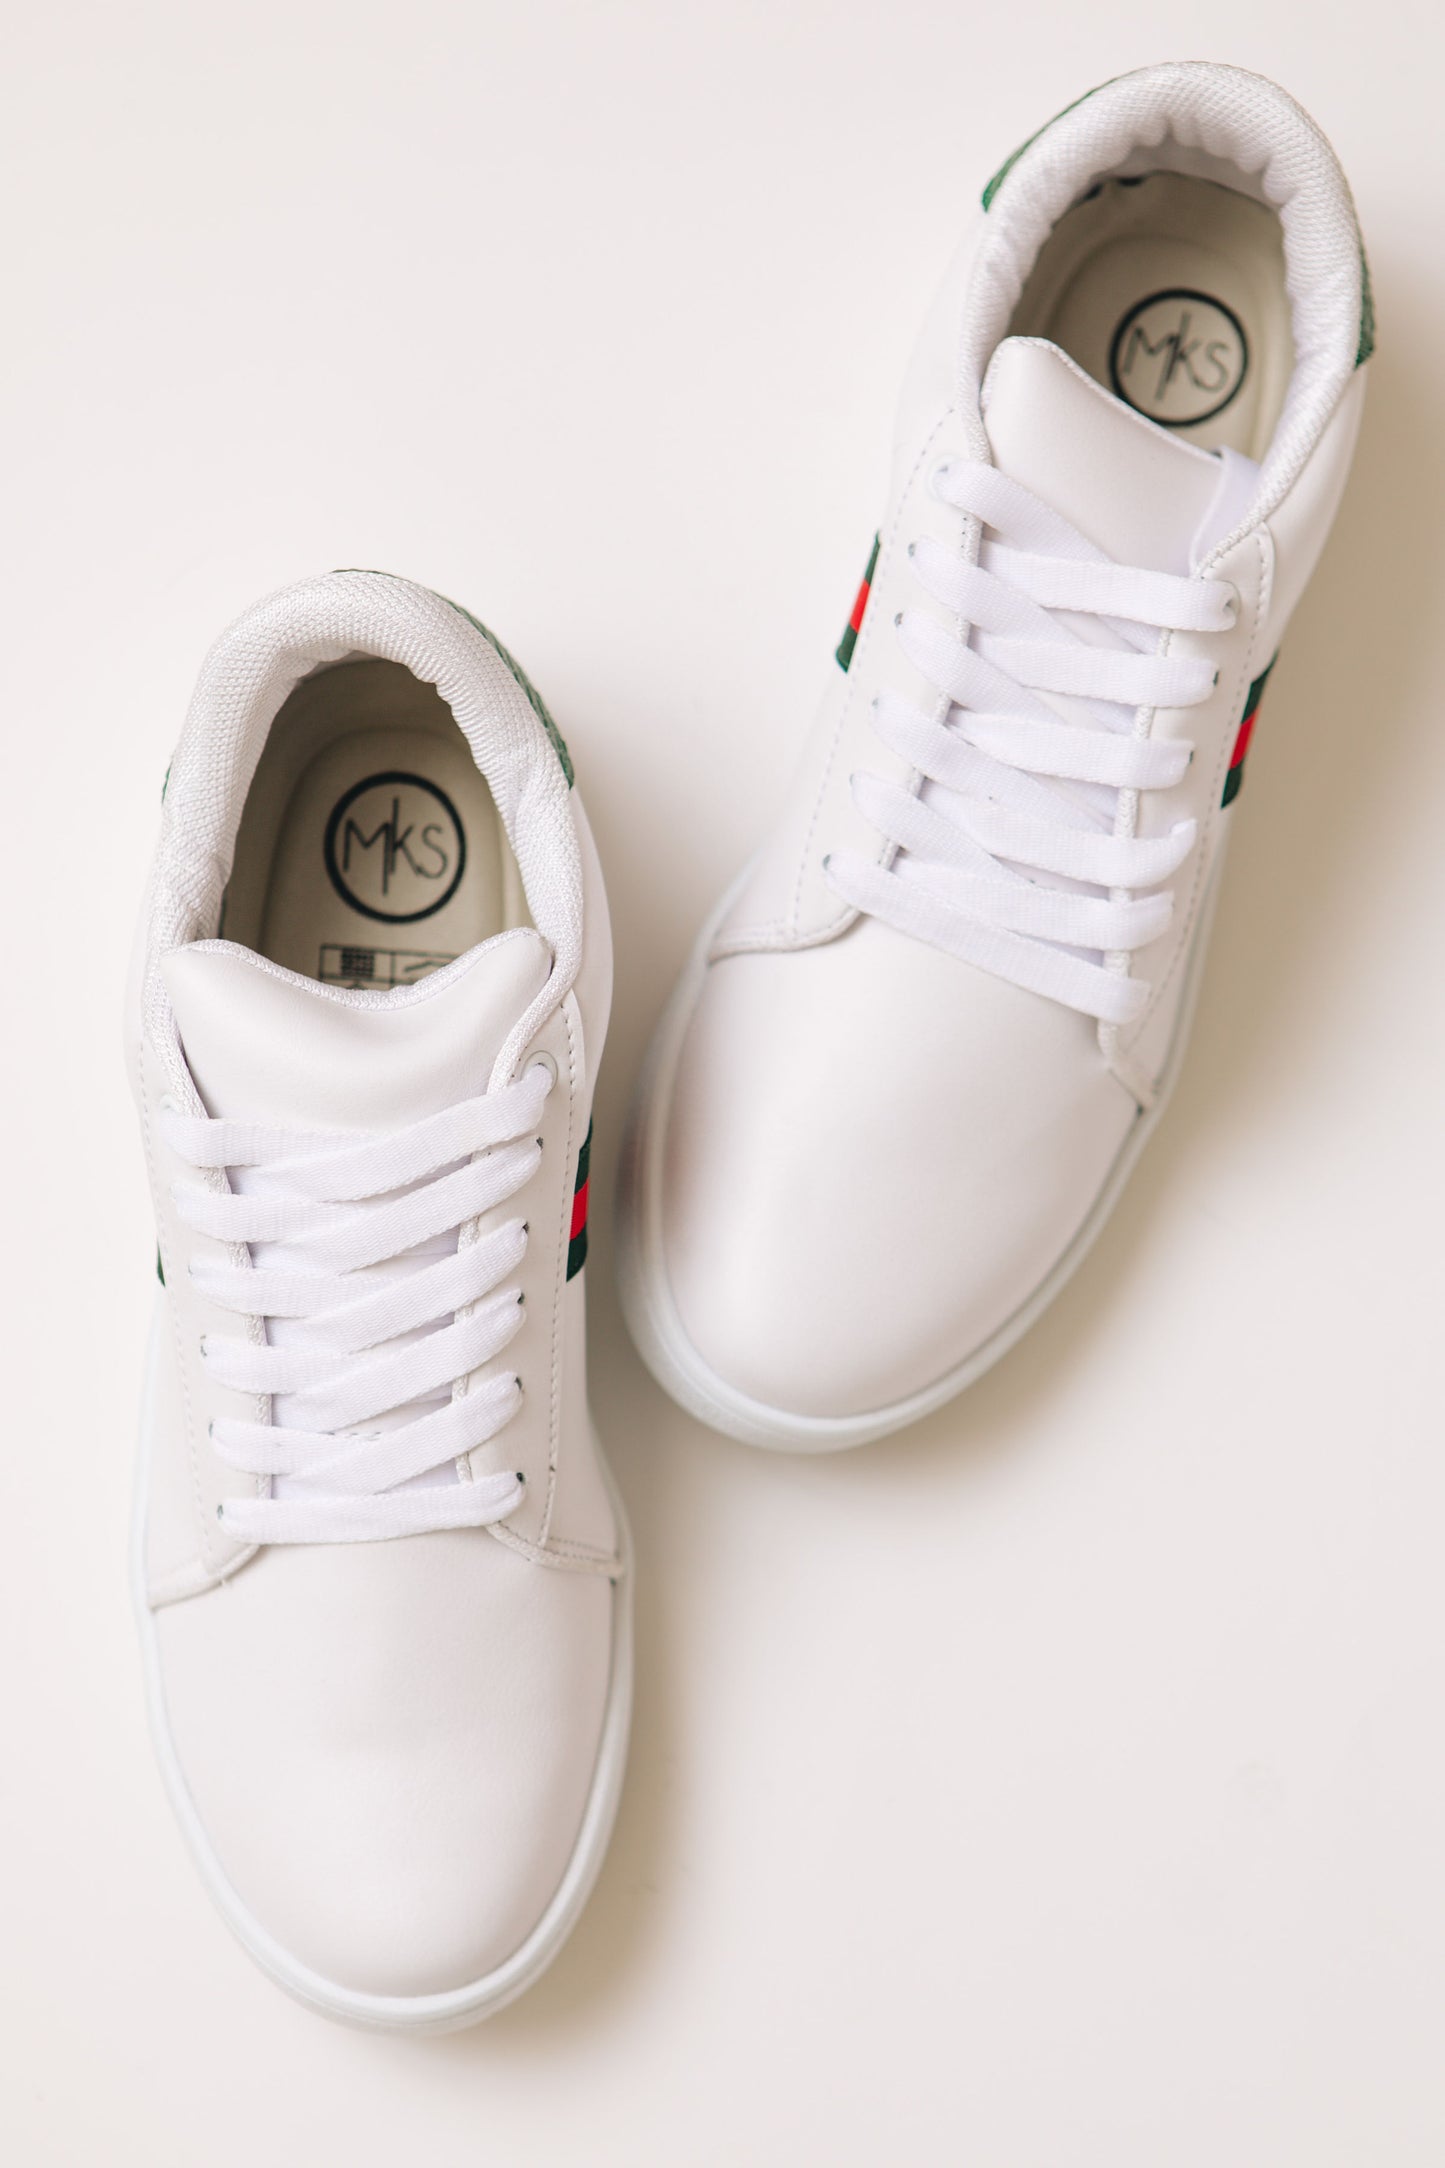 White Sneakers with the Green and Red Stripes